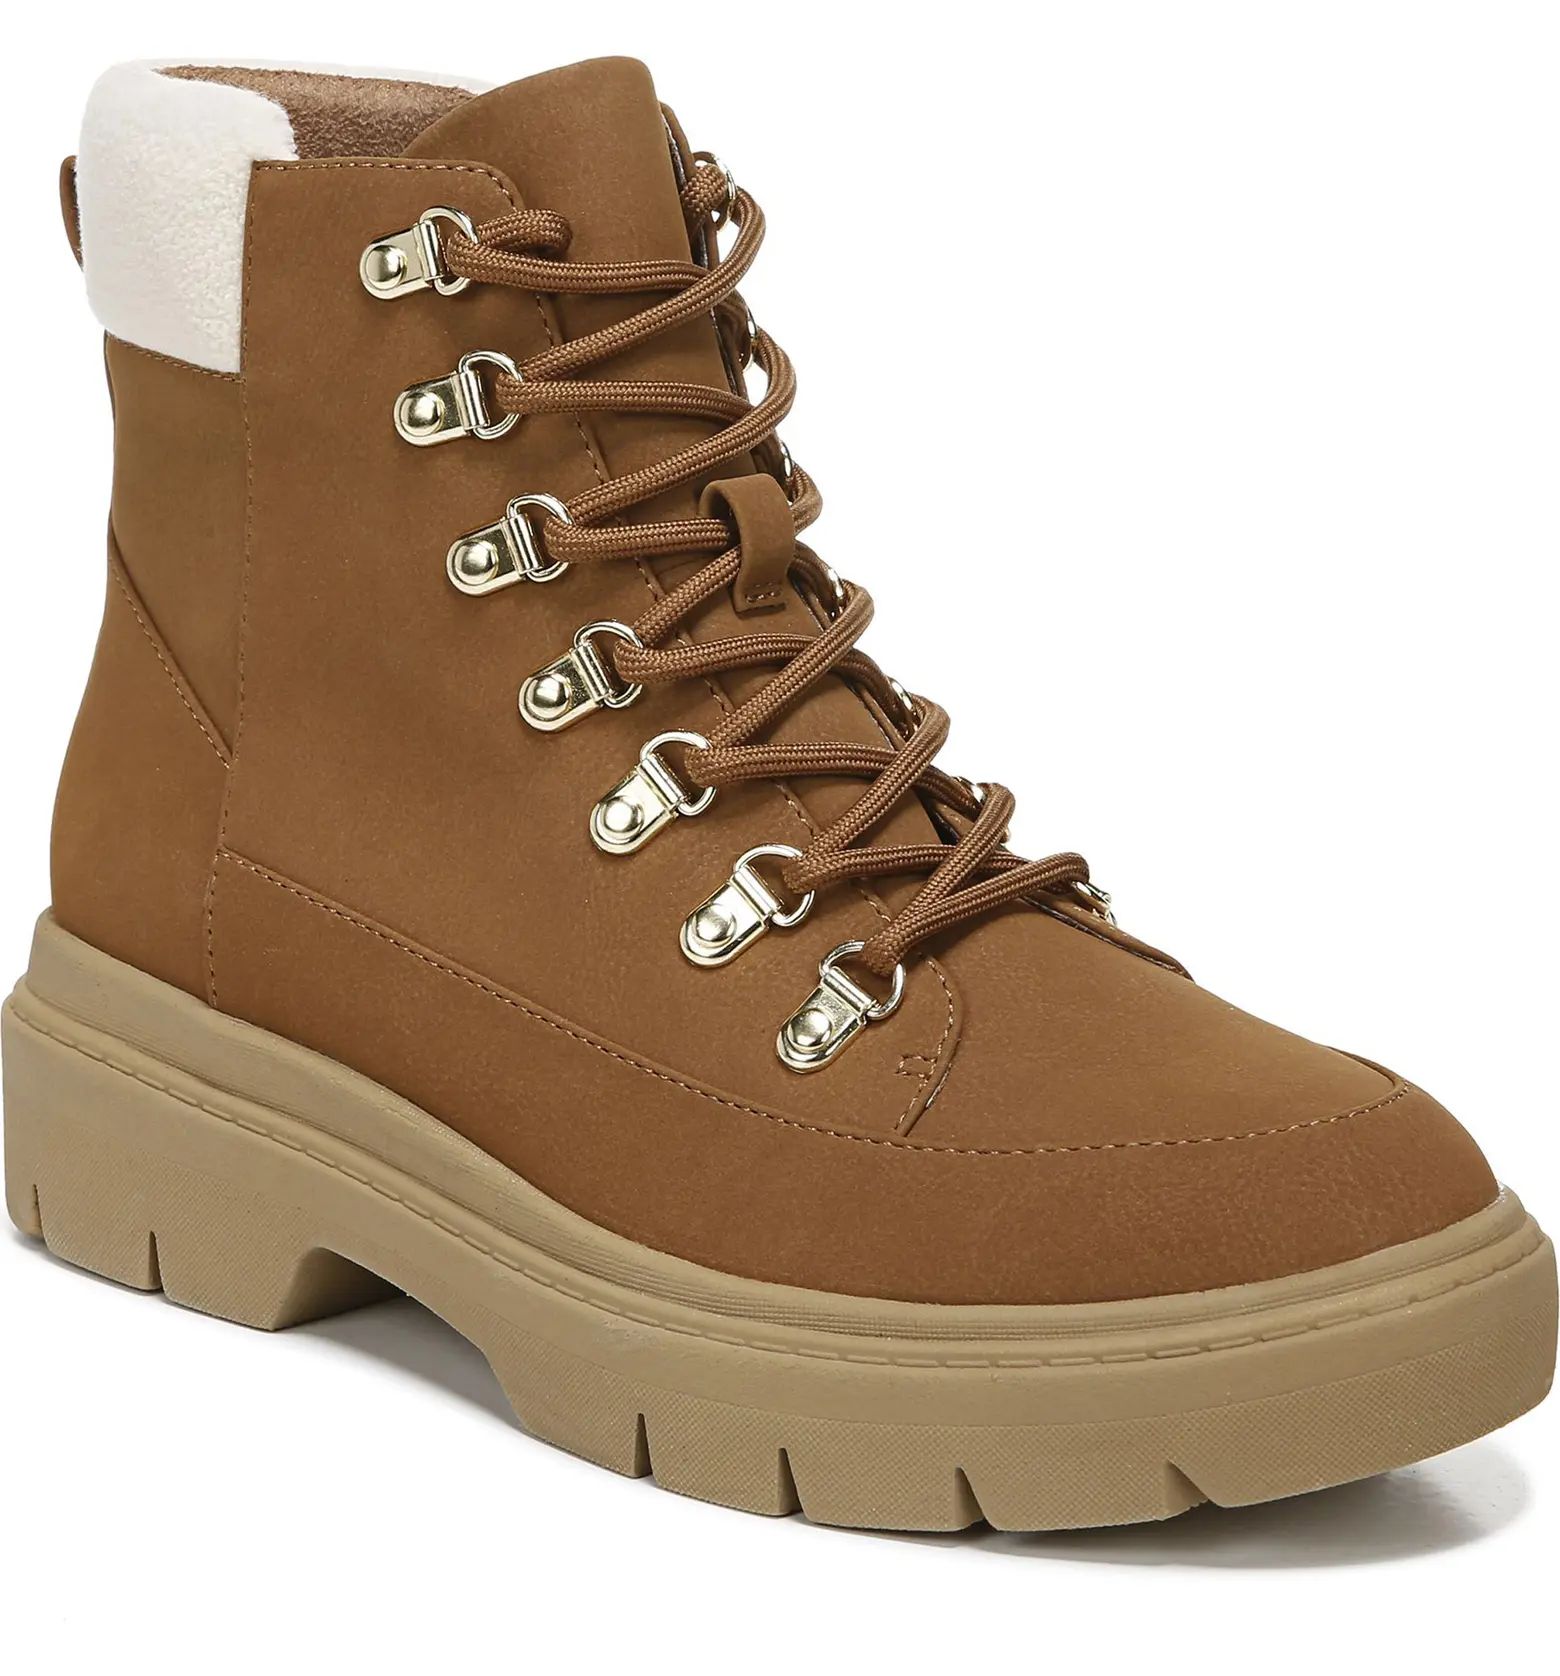 Canyon Hiking Boot | Nordstrom